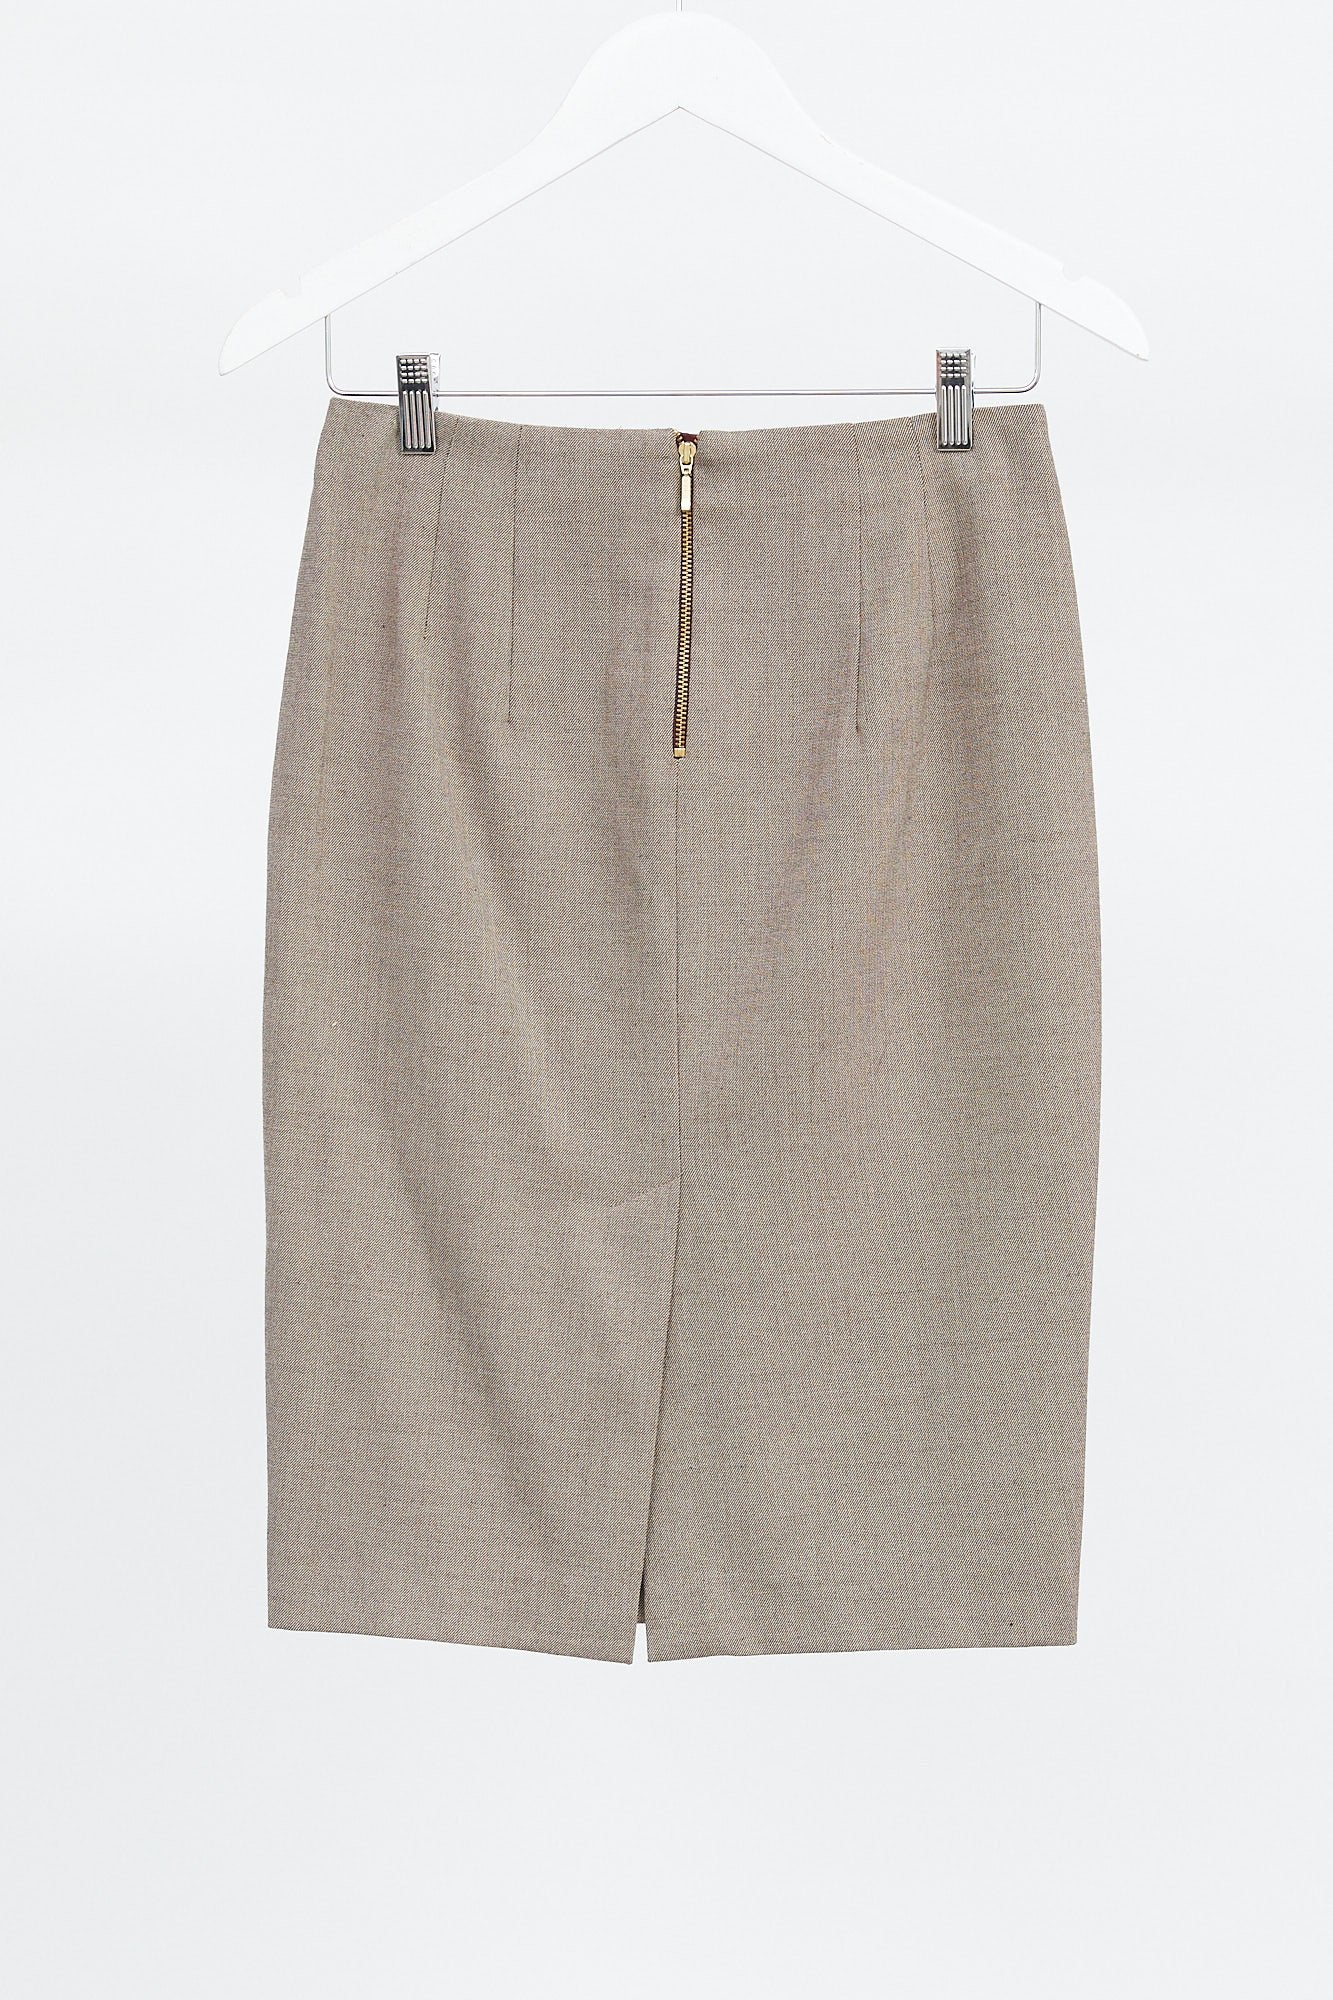 Womens Beige Pencil Skirt: Size Small